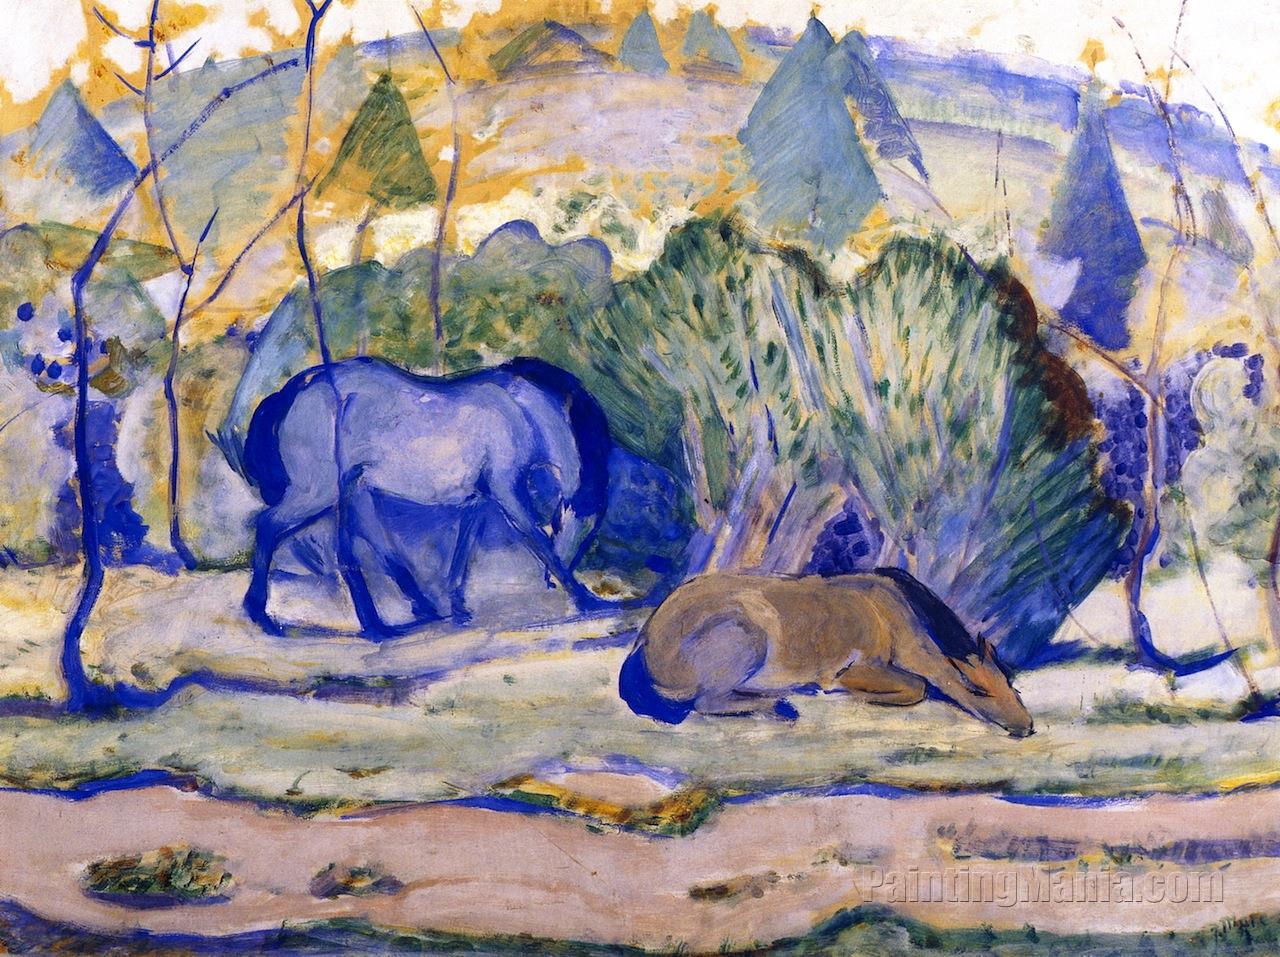 Horses at Pasture (Horses in a Landscape)